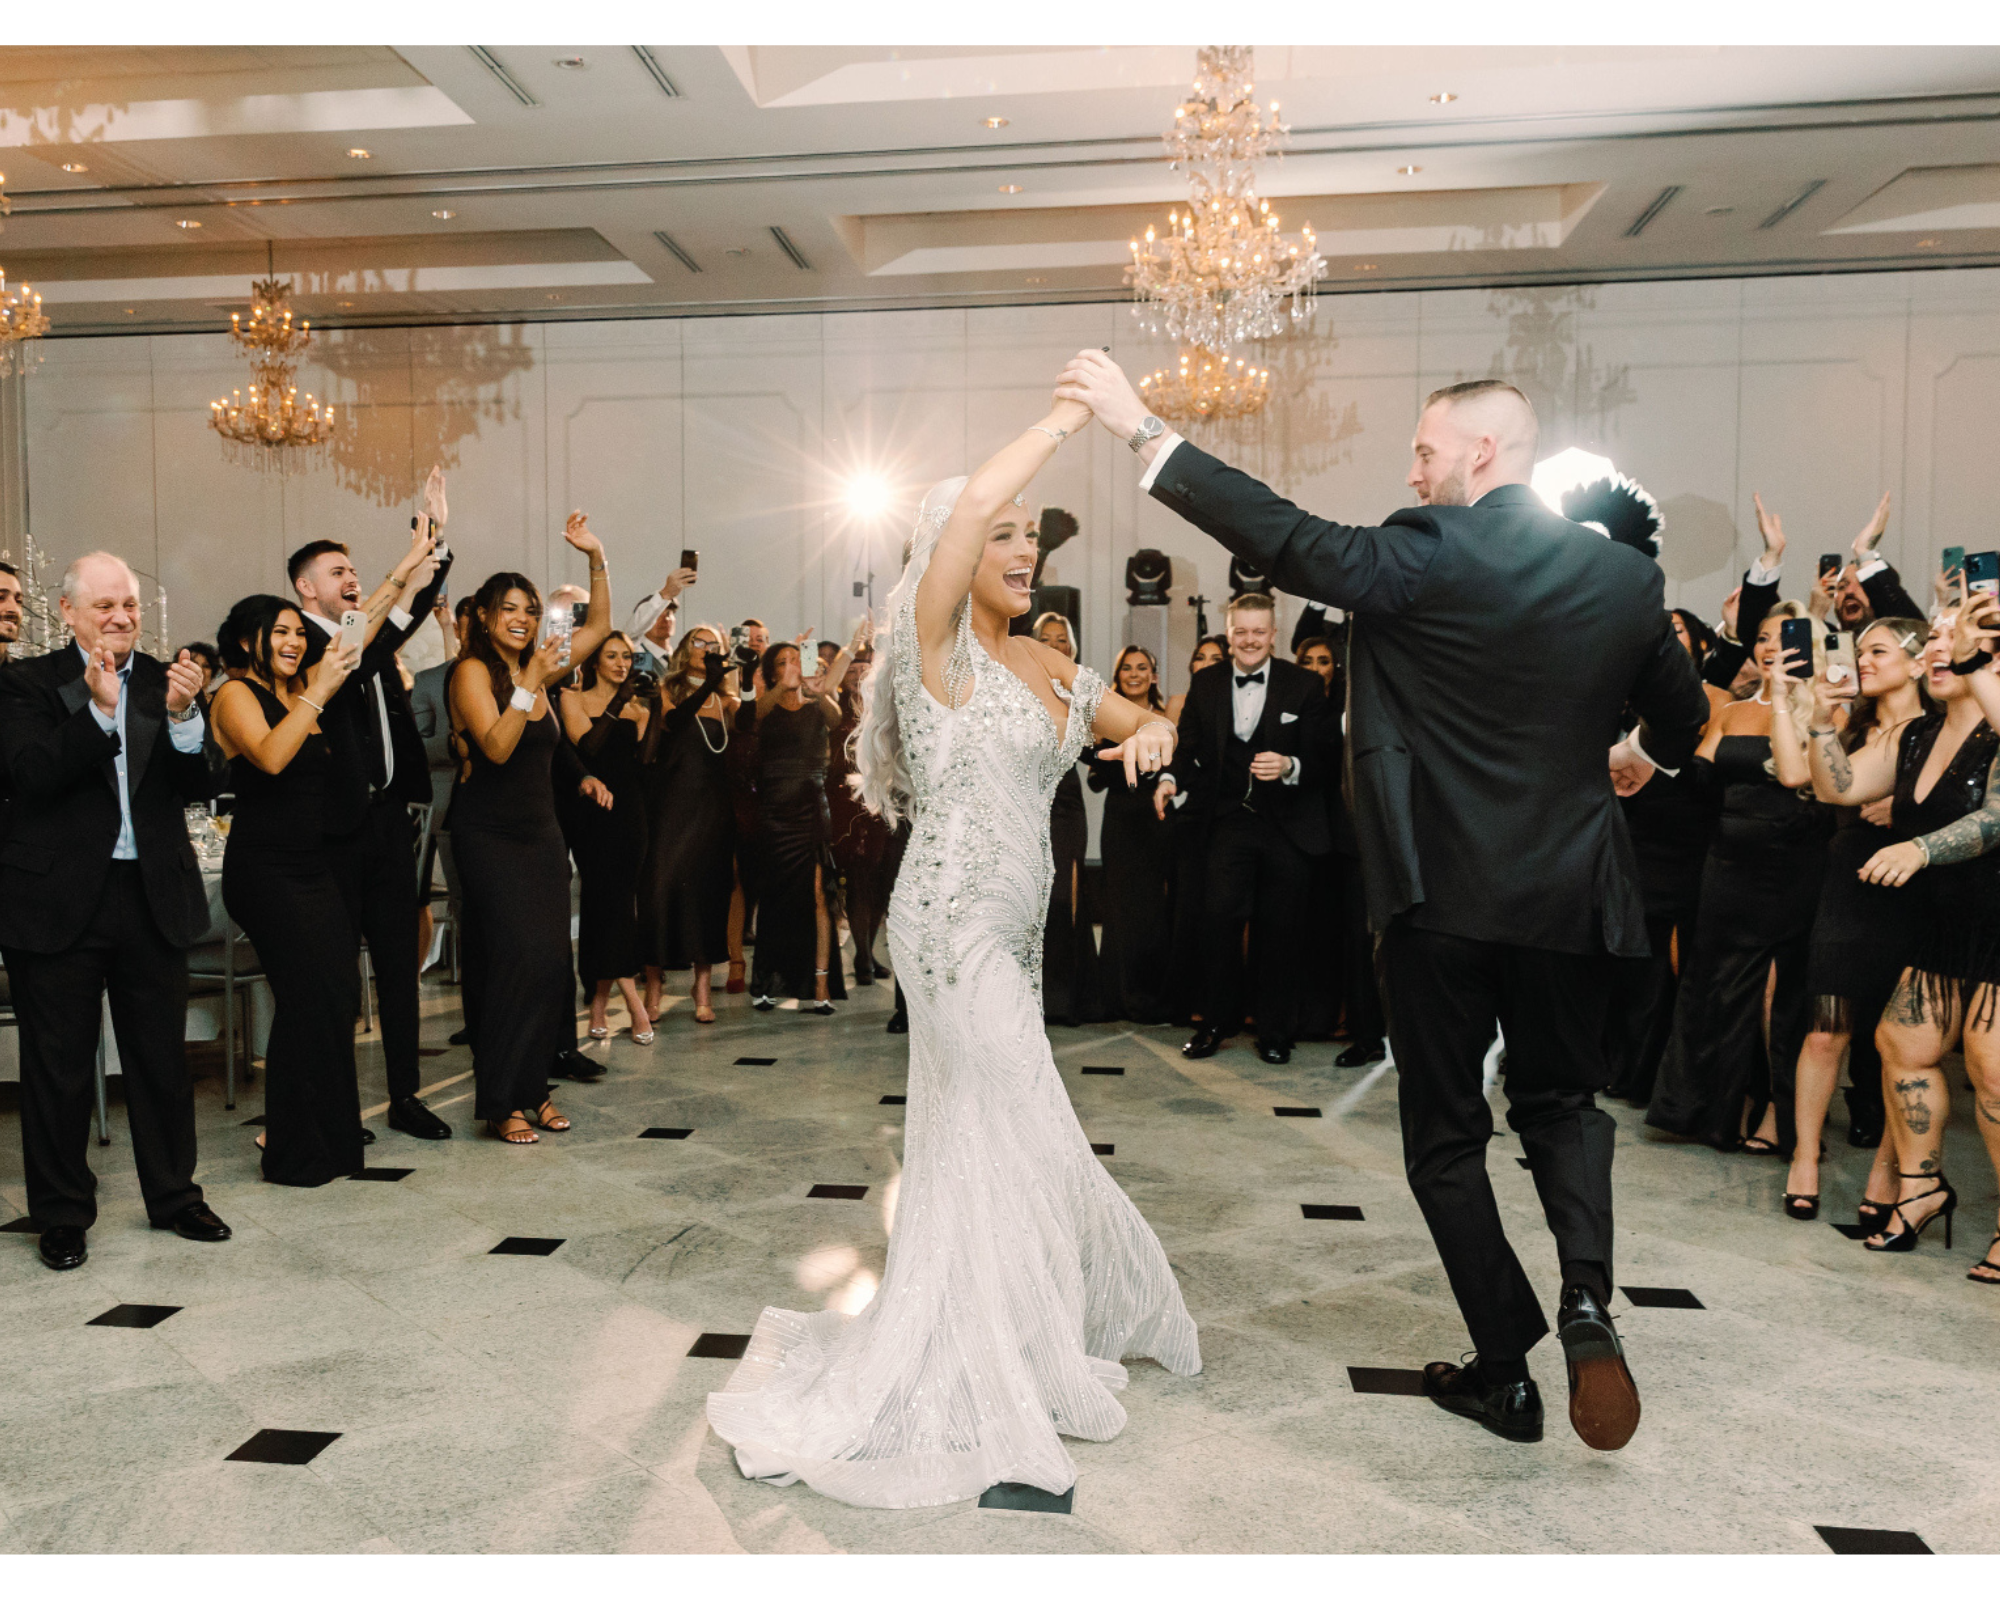 Great Gatsby-inspired bride dancing with her handsome groom. She's wearing a Swarovski-crystal bridal halo headpiece and beaded gown.